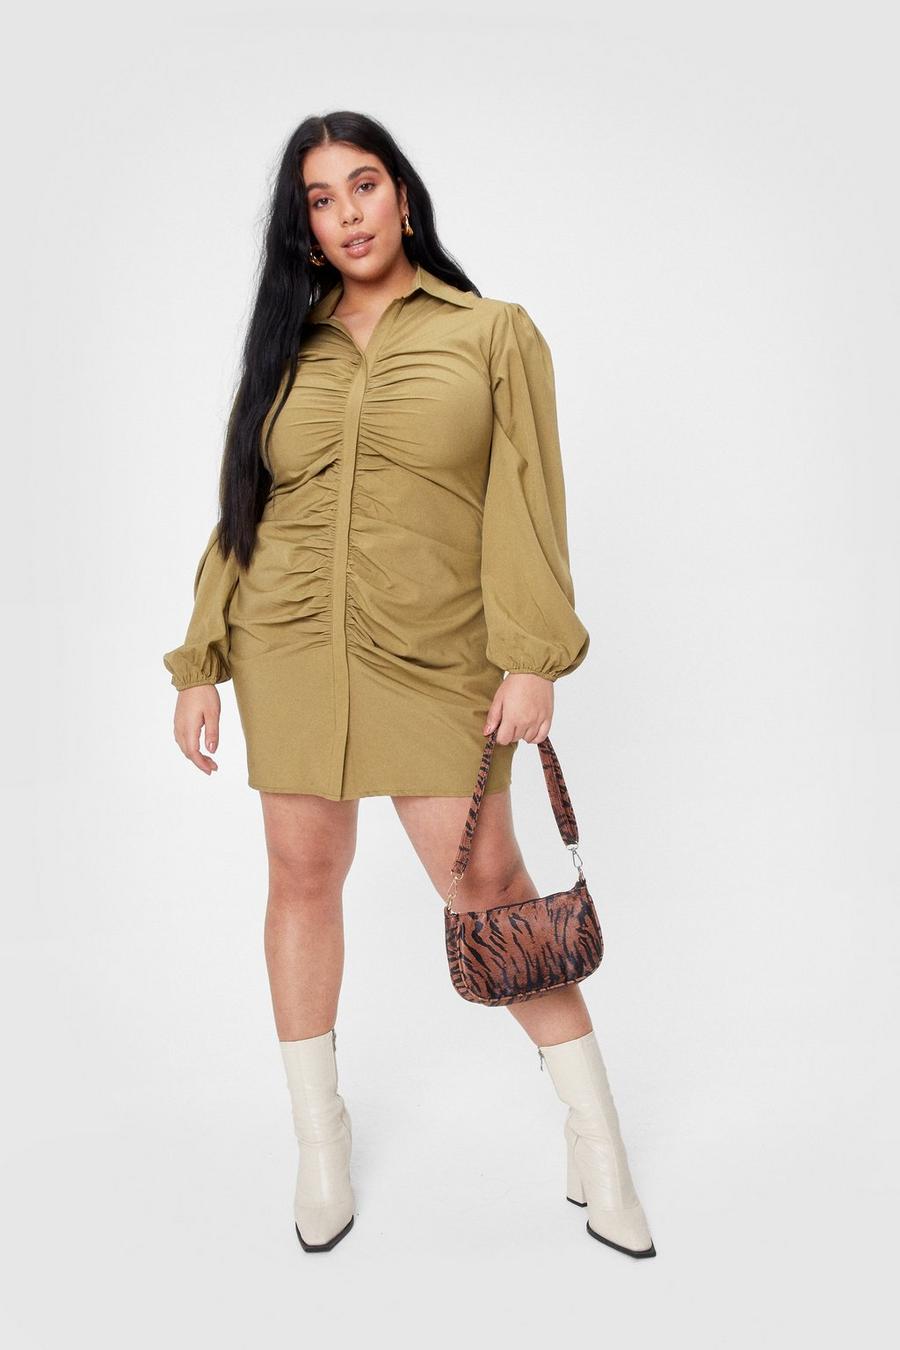 Olive green Plus Size Ruched Fitted Shirt Dress